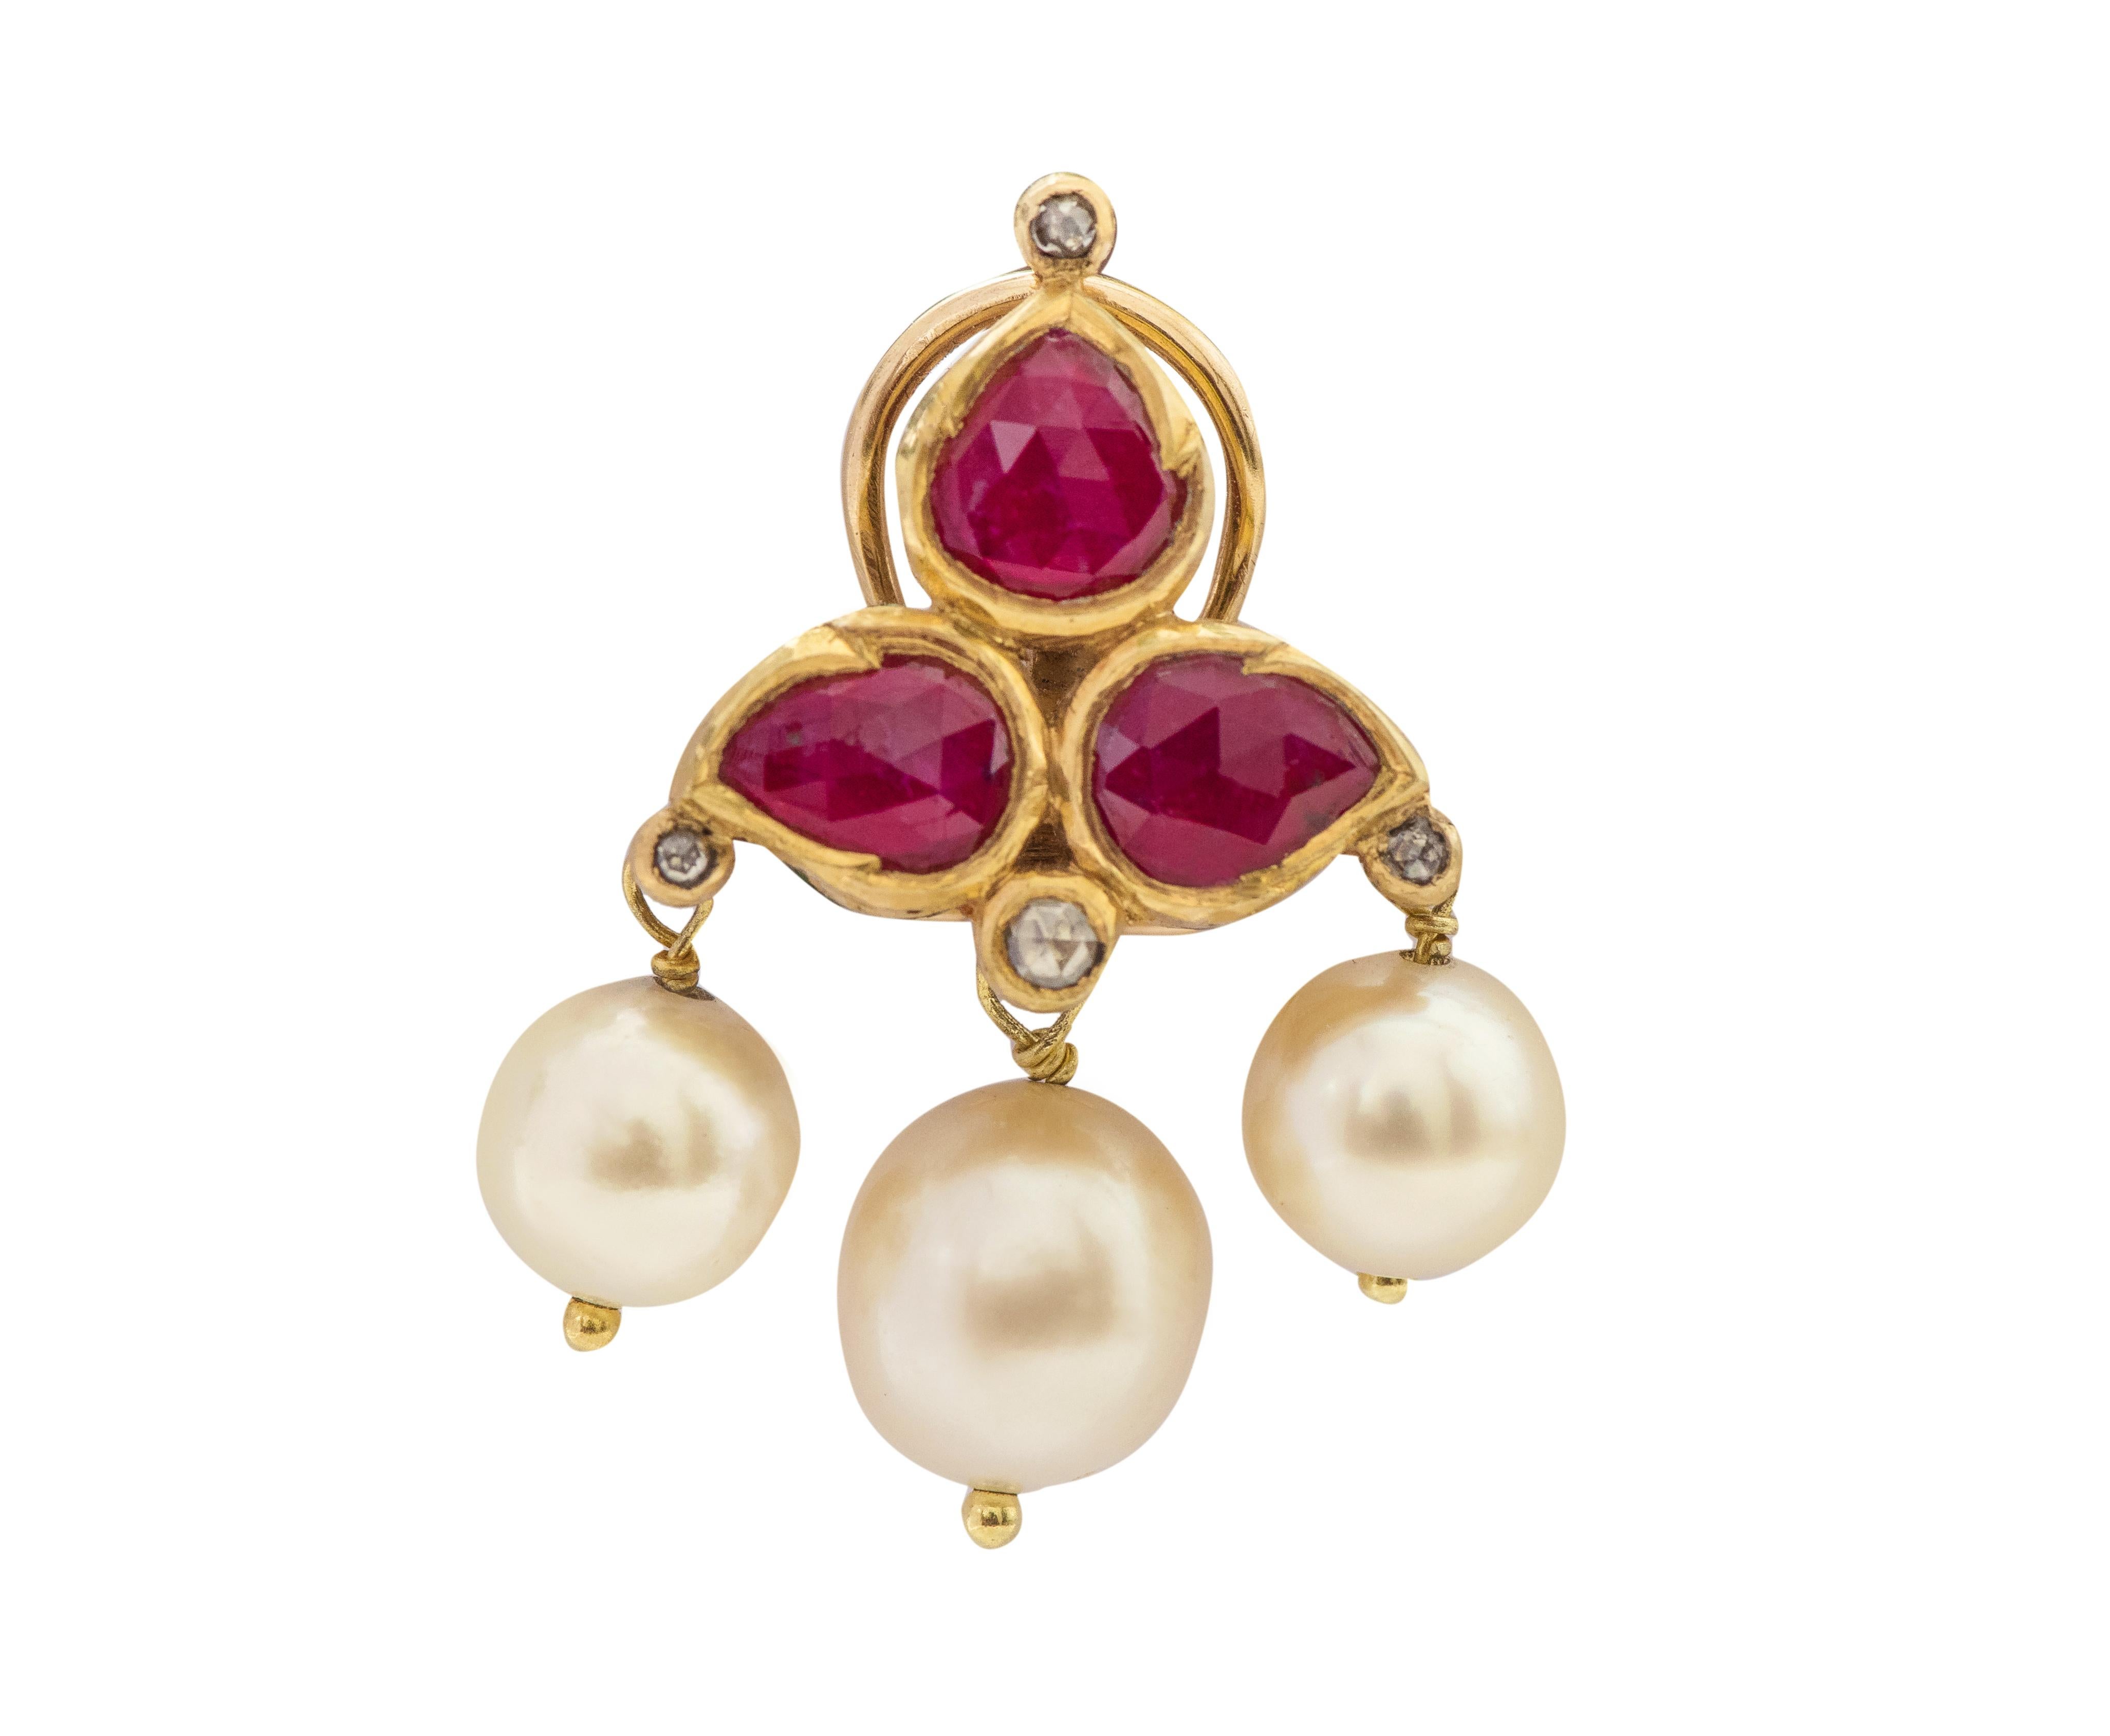 Anglo-Indian 22 Karat Gold Ruby, Diamond, and Pearl Stud Earring Enamel Work Handcrafted For Sale